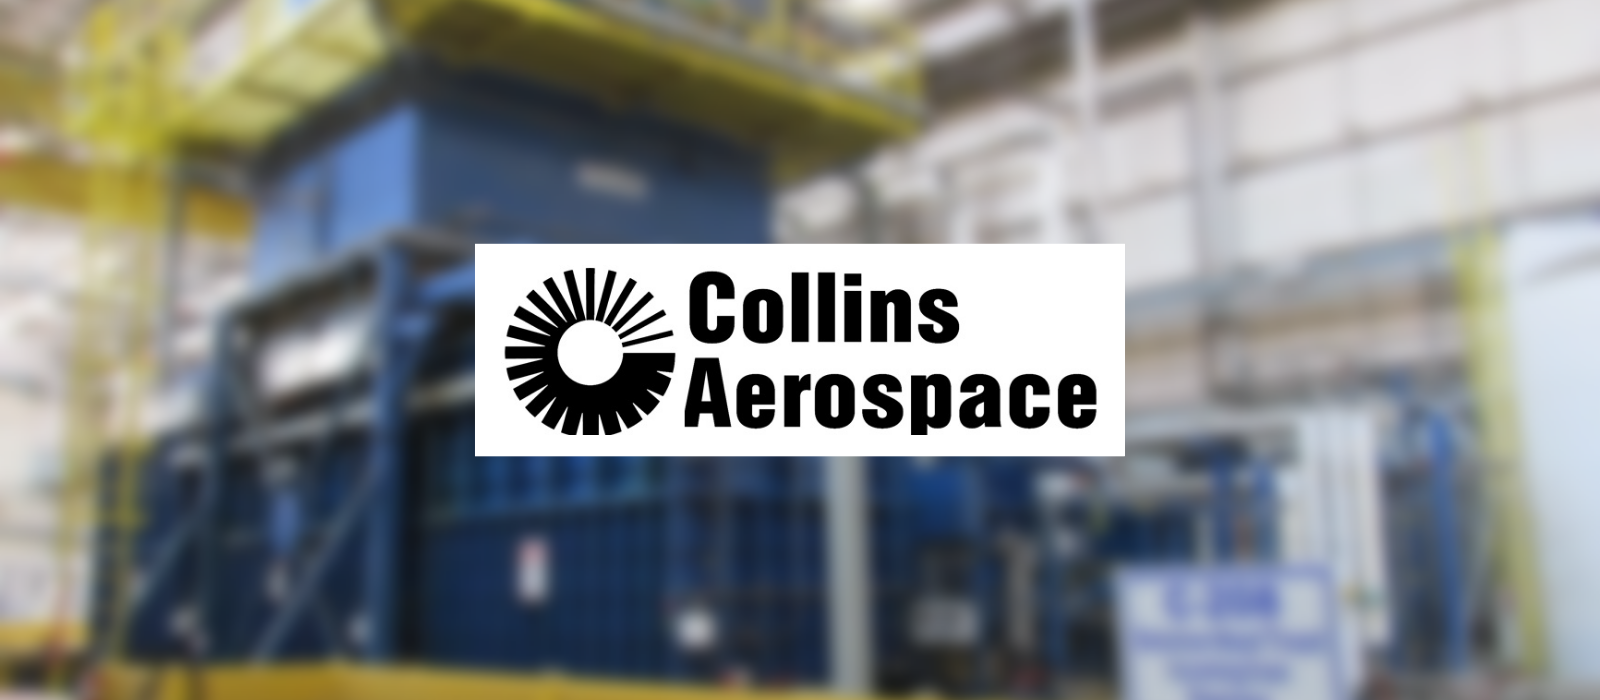 HGP to Manage Massive Auction of Collins Aerospace’s Chula Vista Manufacturing Plant